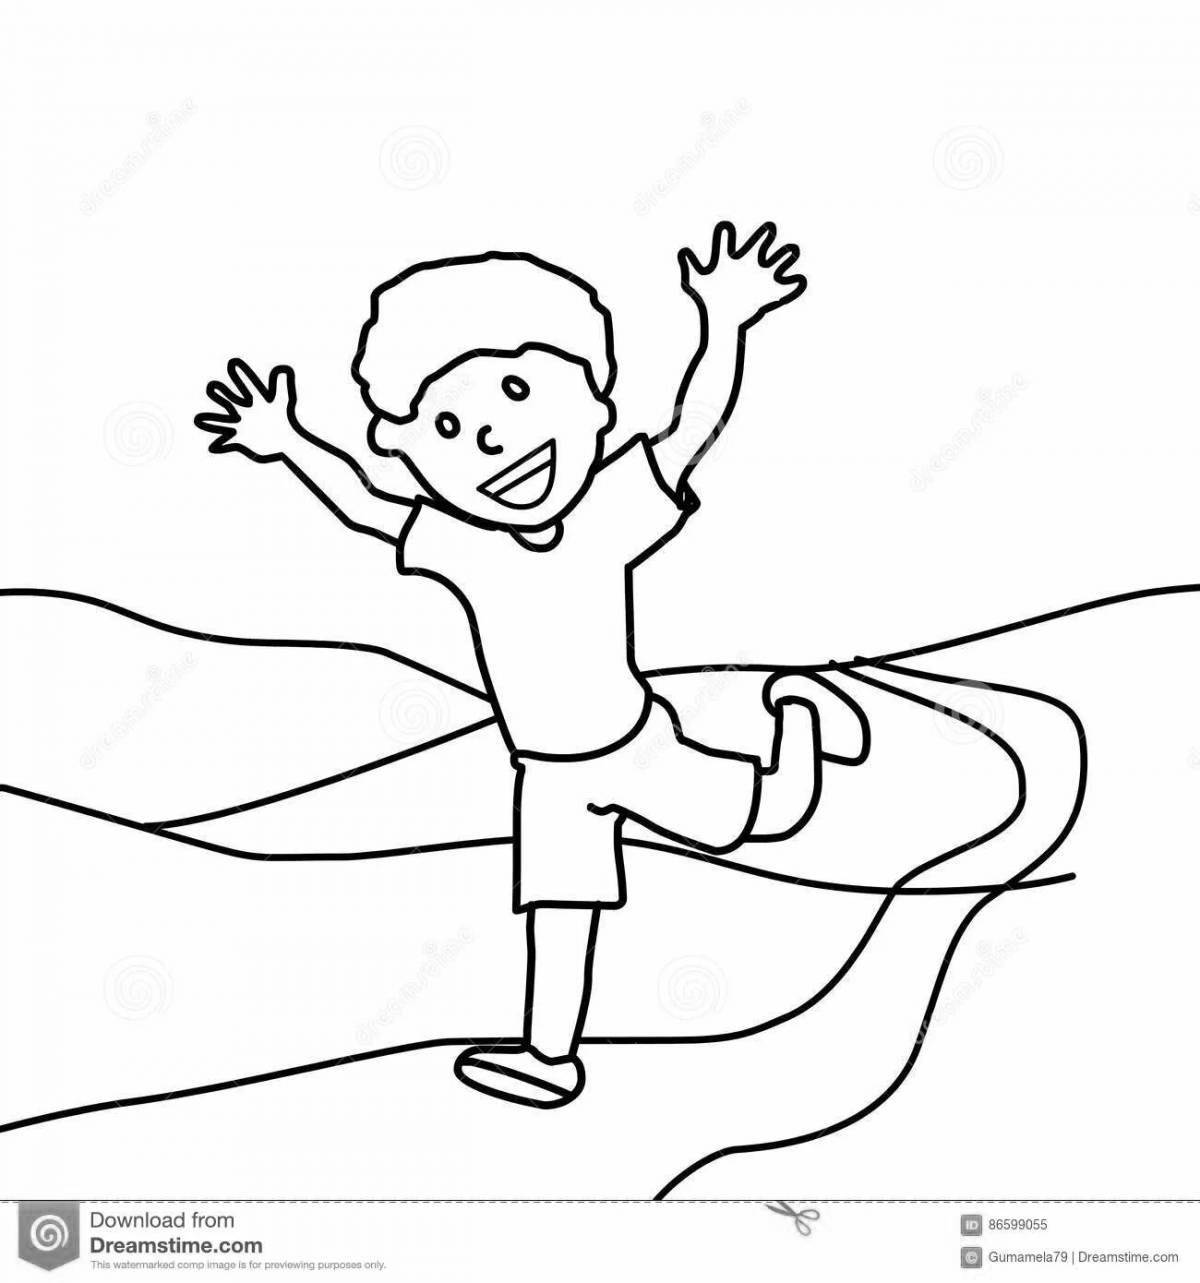 Colorful running boy coloring page